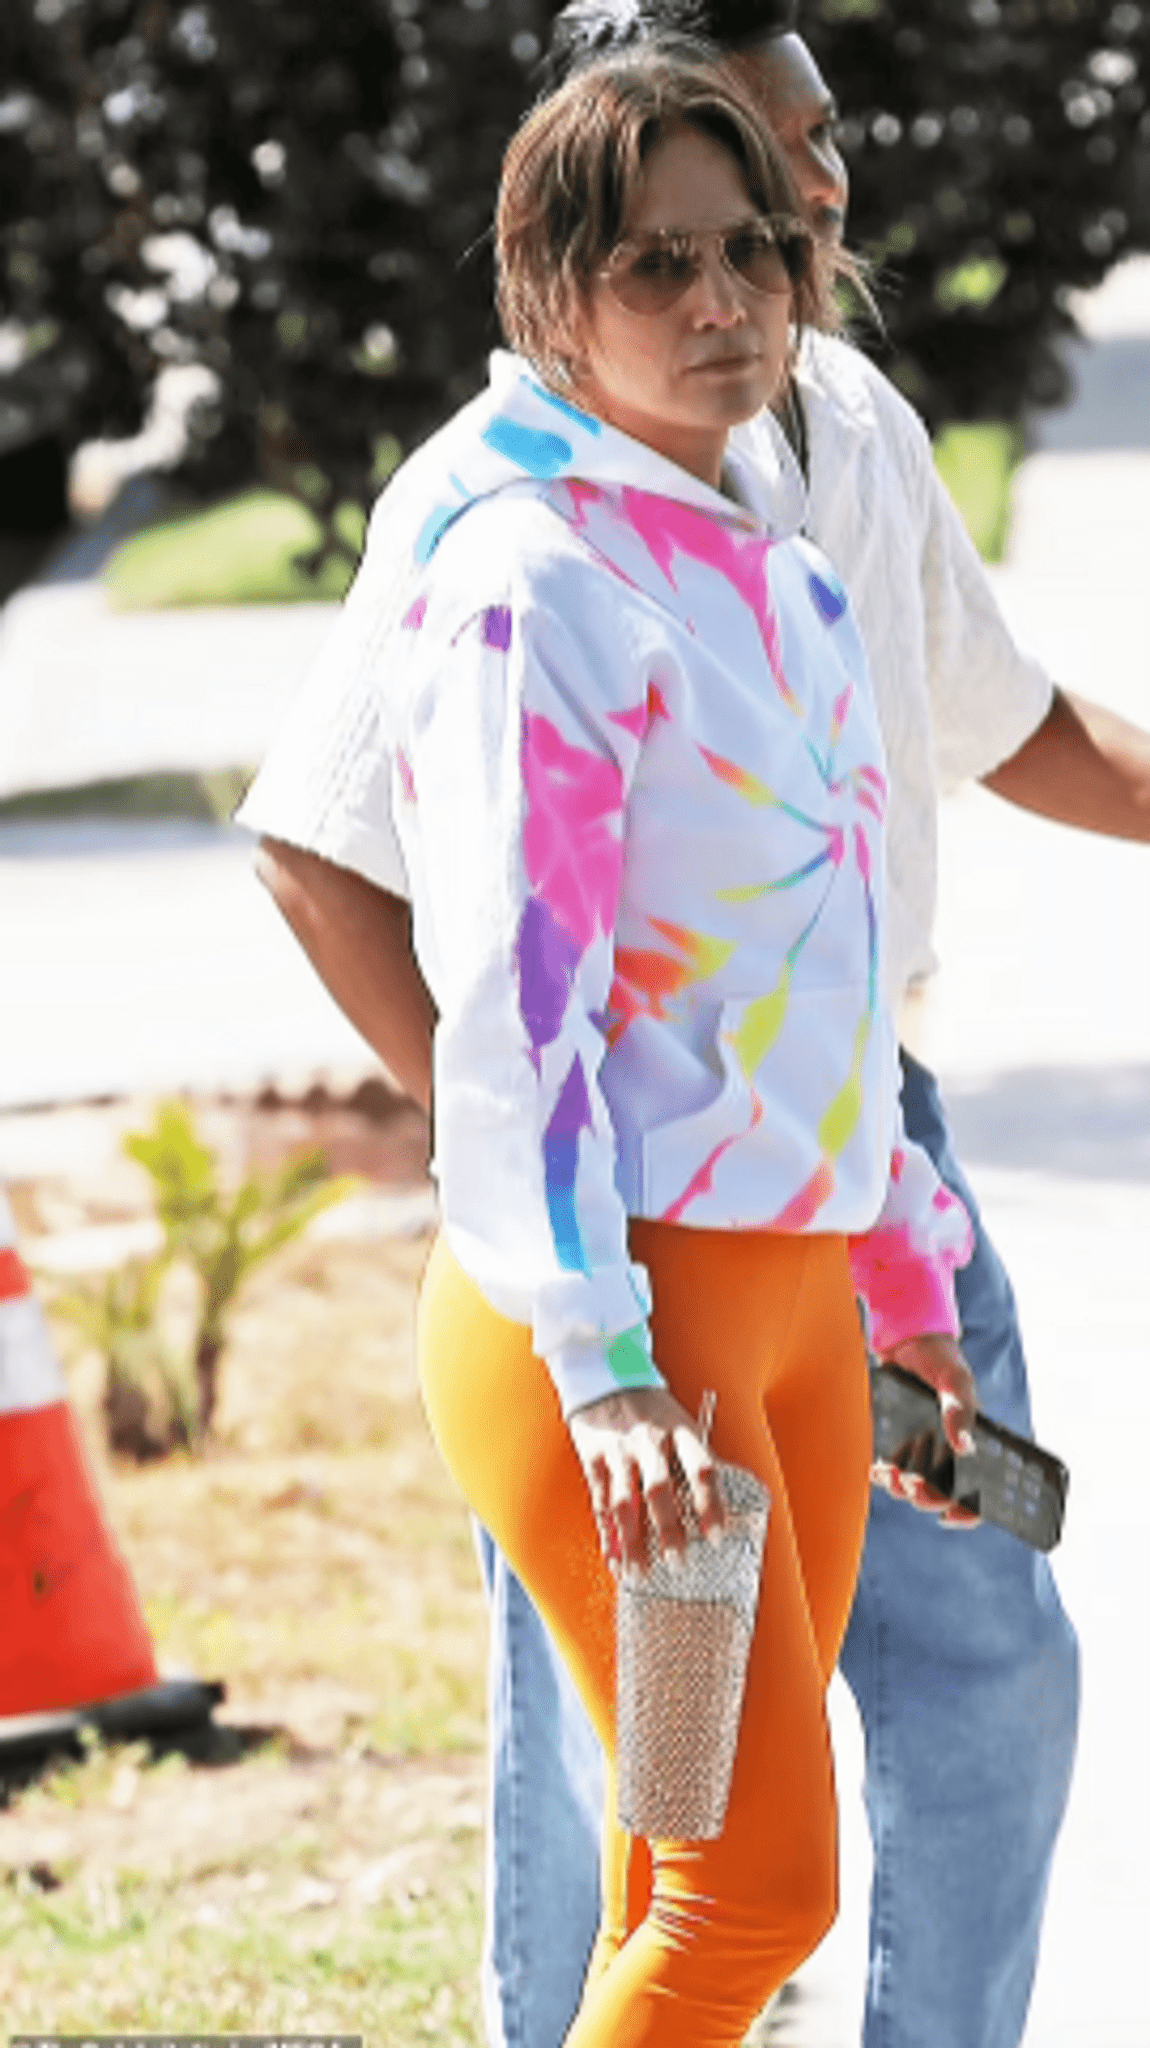 jennifer-lopez-wears-orange-leggings-to-show-her-love-for-cheerful-colors